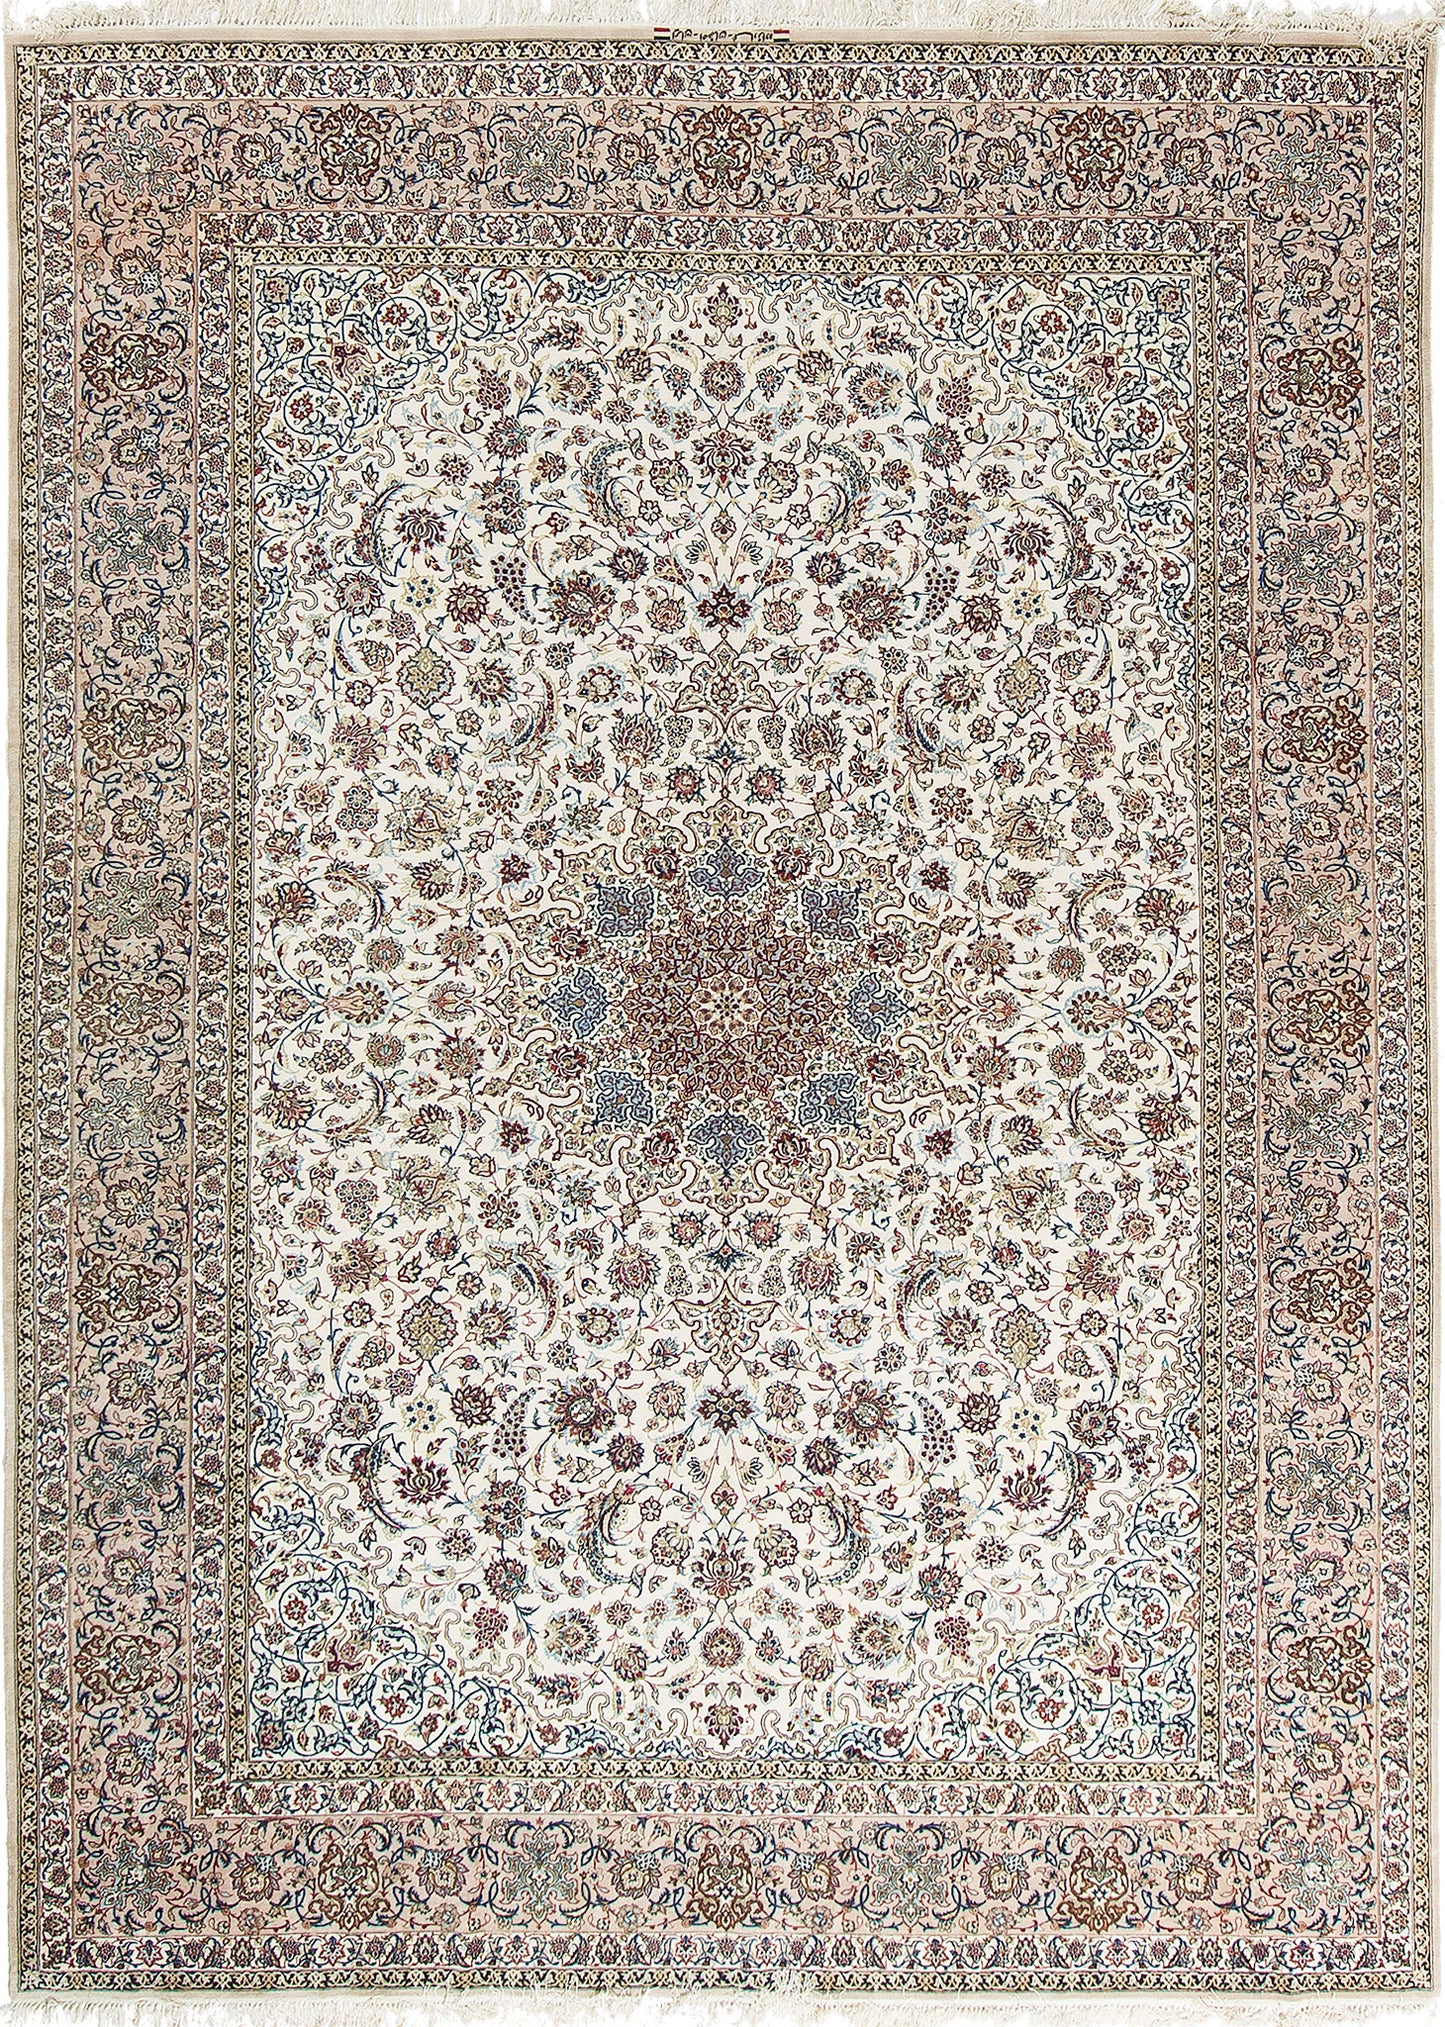 Fine Persian Isfahan Rug Weave by Emadzadeh 26893